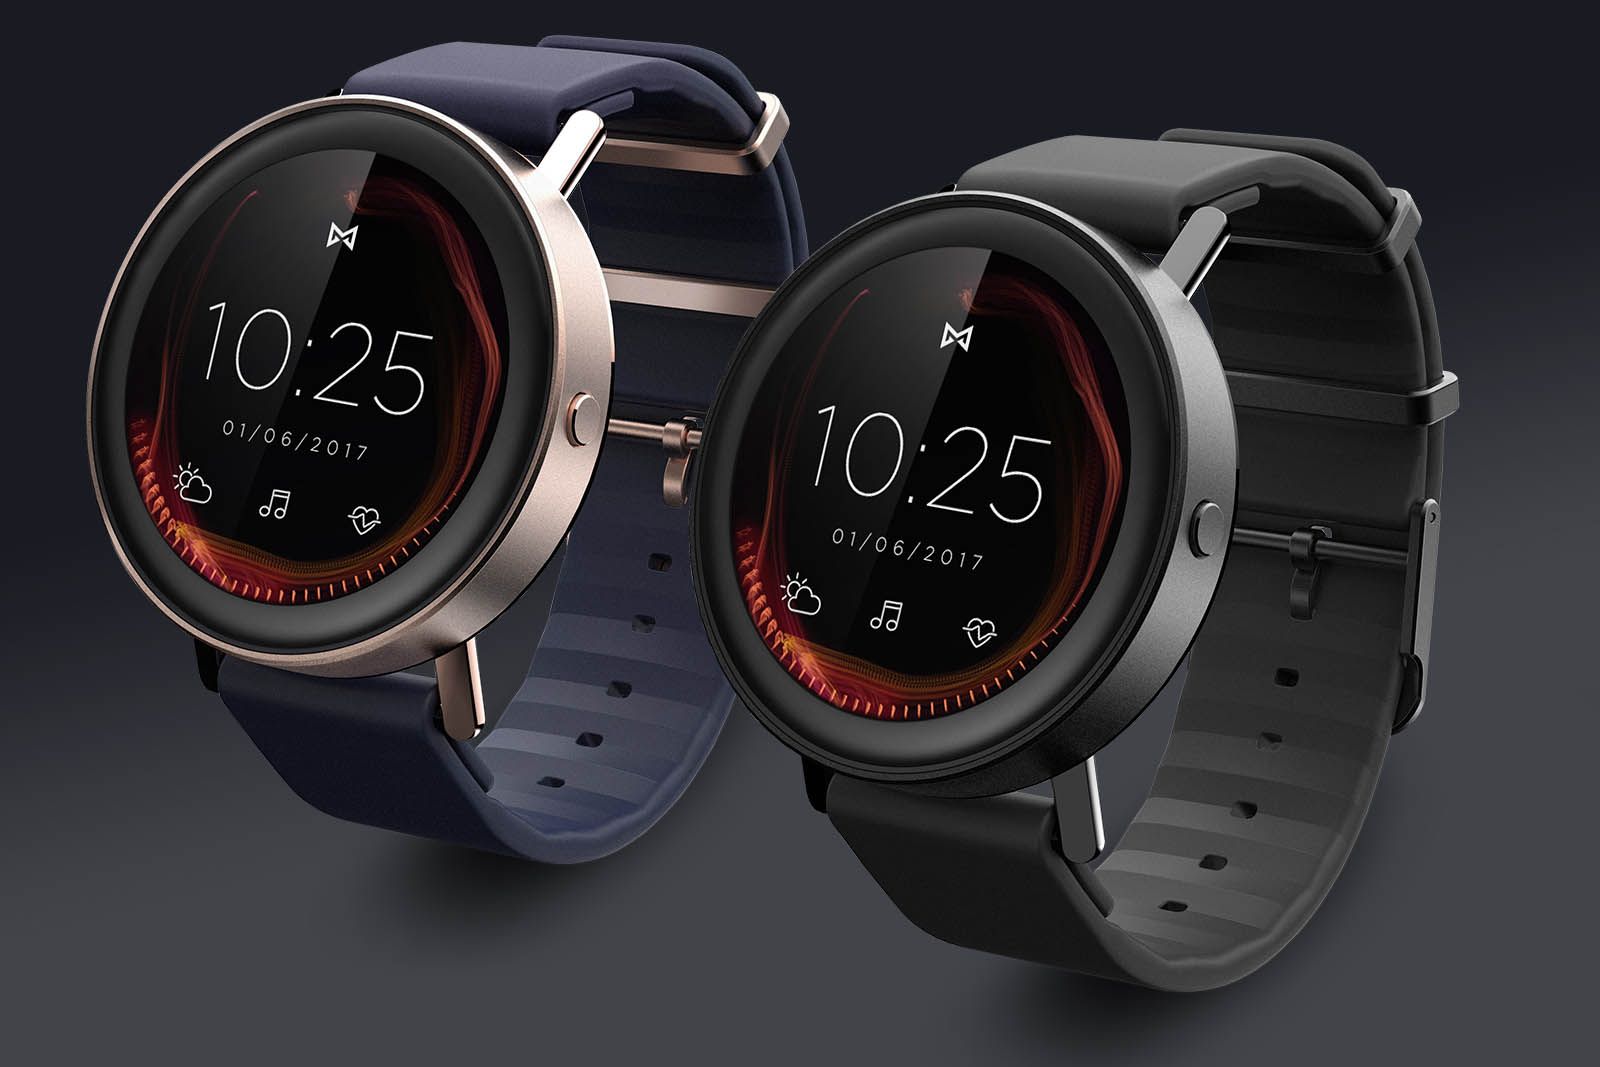 misfit vapor watch with optical heart rate finally set for 31 october release image 1